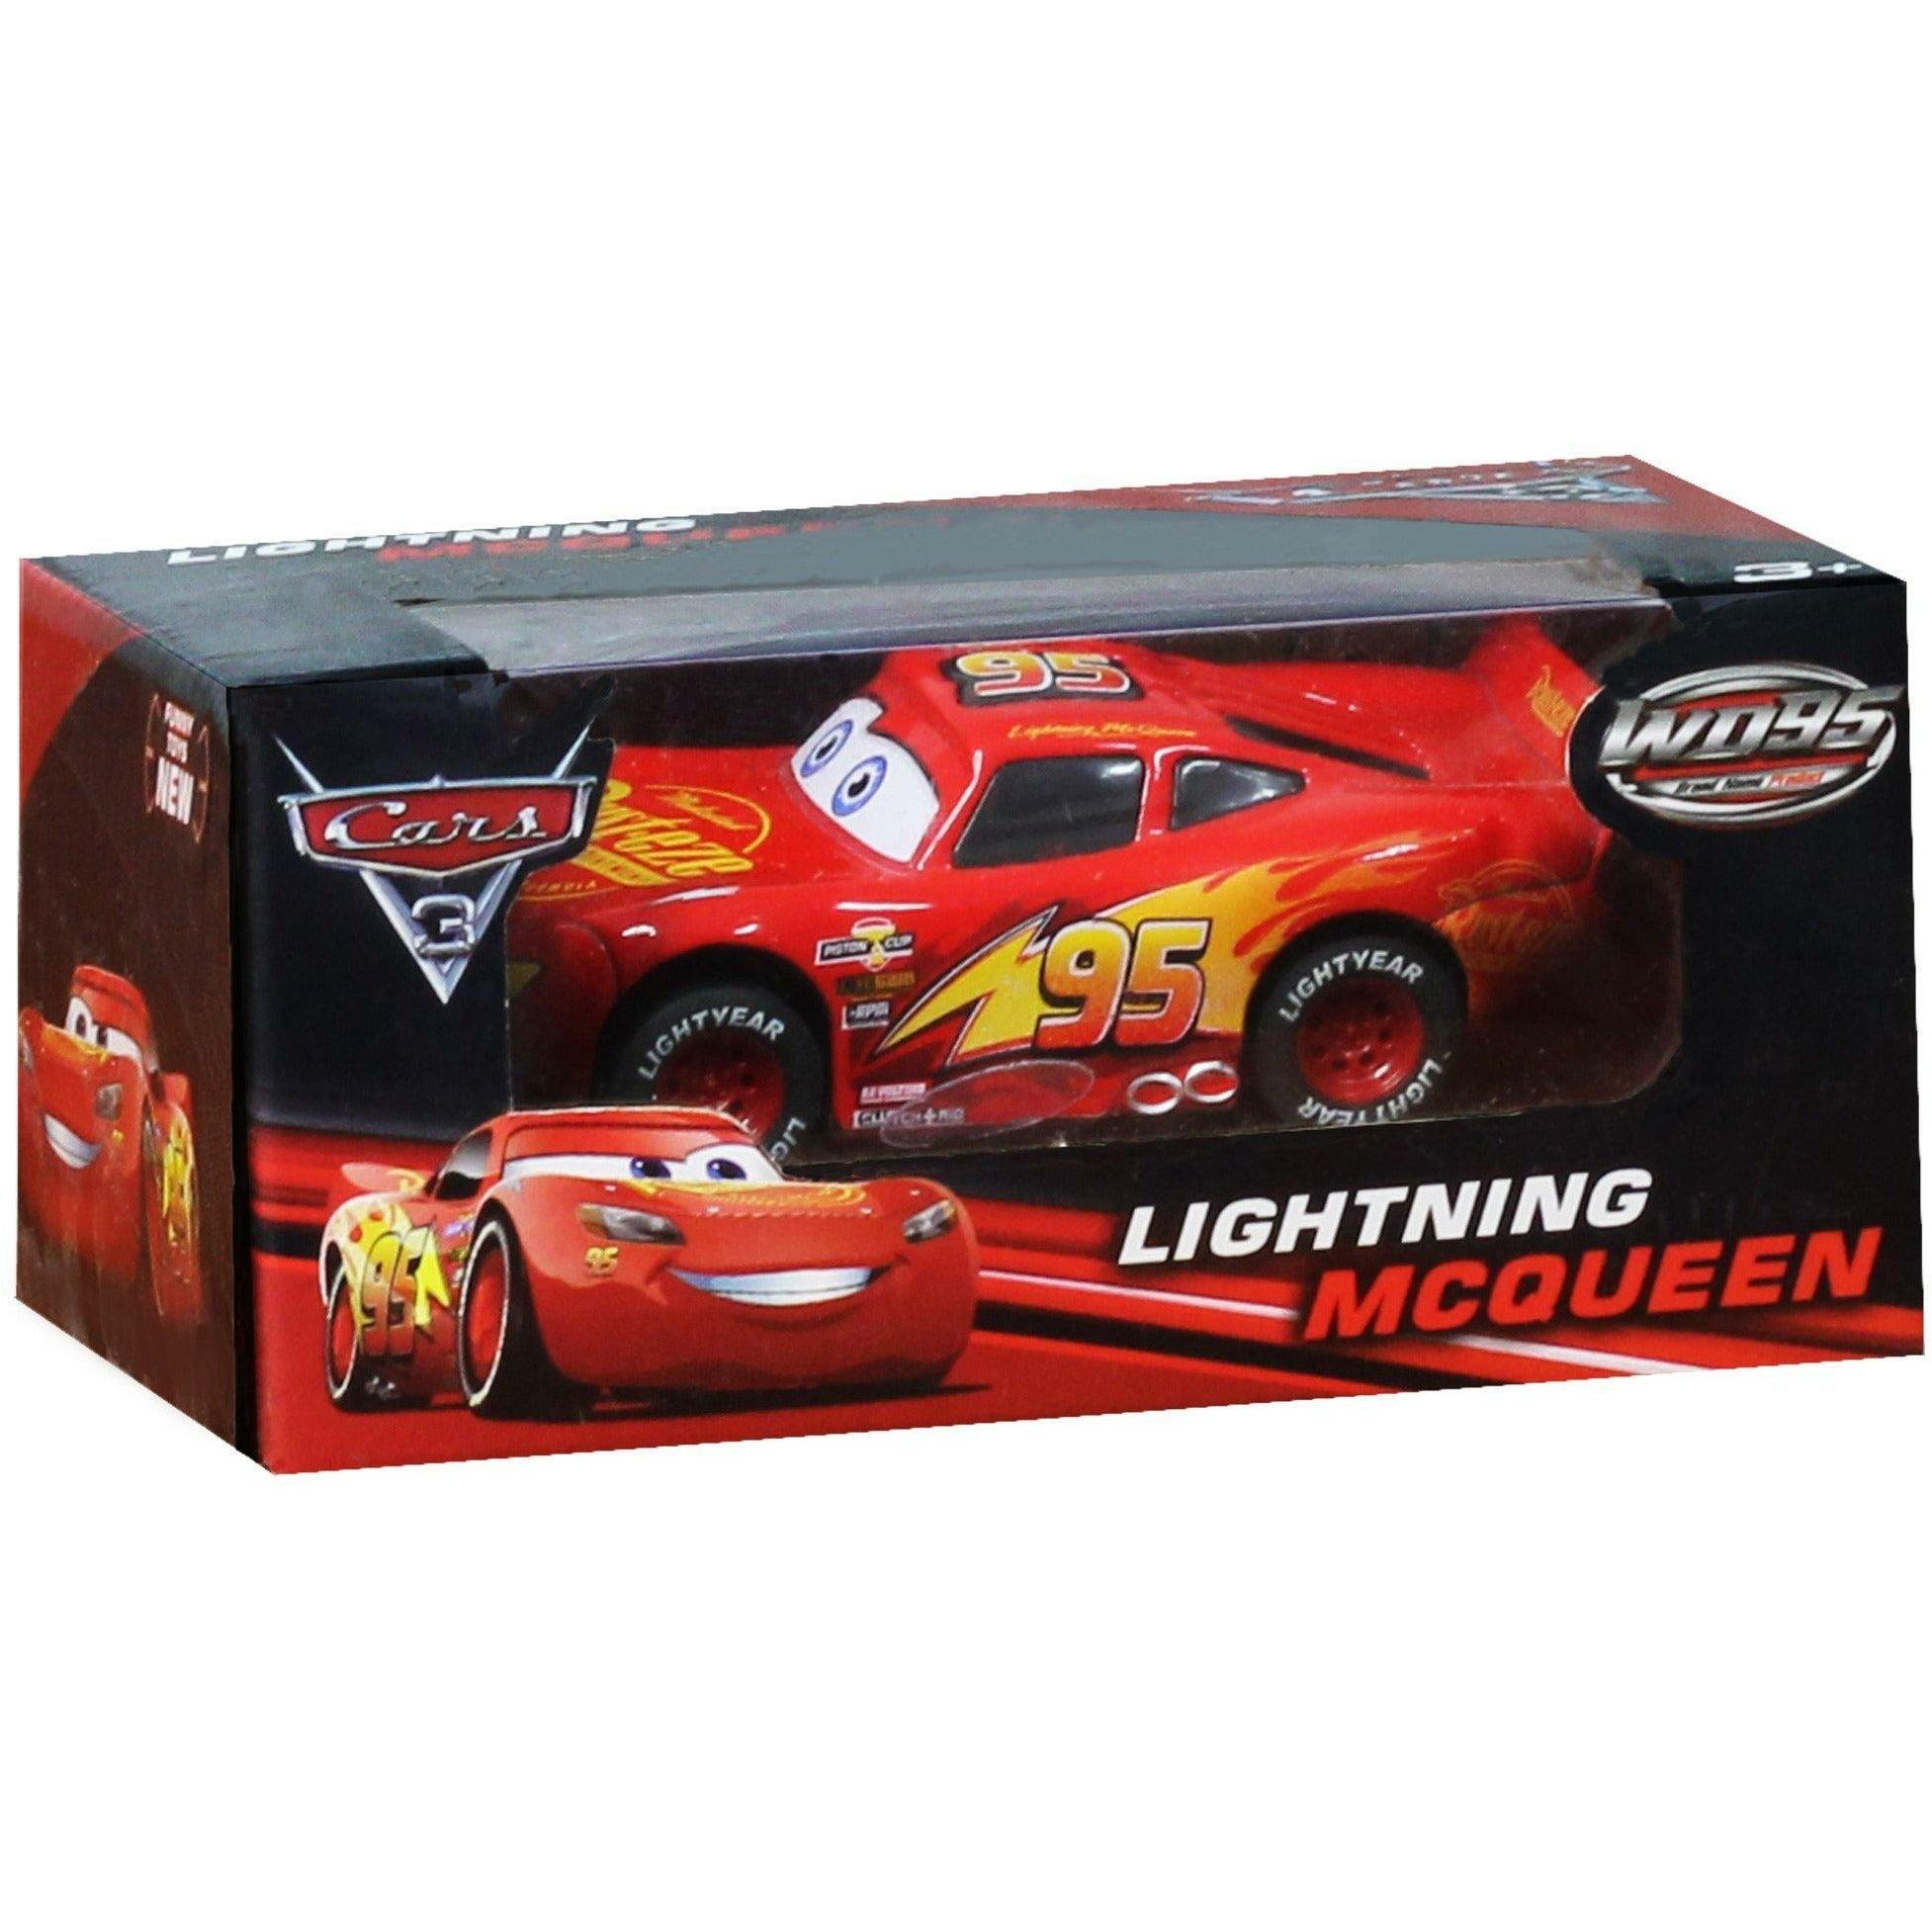 Cars Lightning McQueen Die Cast Car With Lights N Sounds - BumbleToys - 2-4 Years, 5-7 Years, Boys, Characters, Disney Cars, Pixar, Toy Land